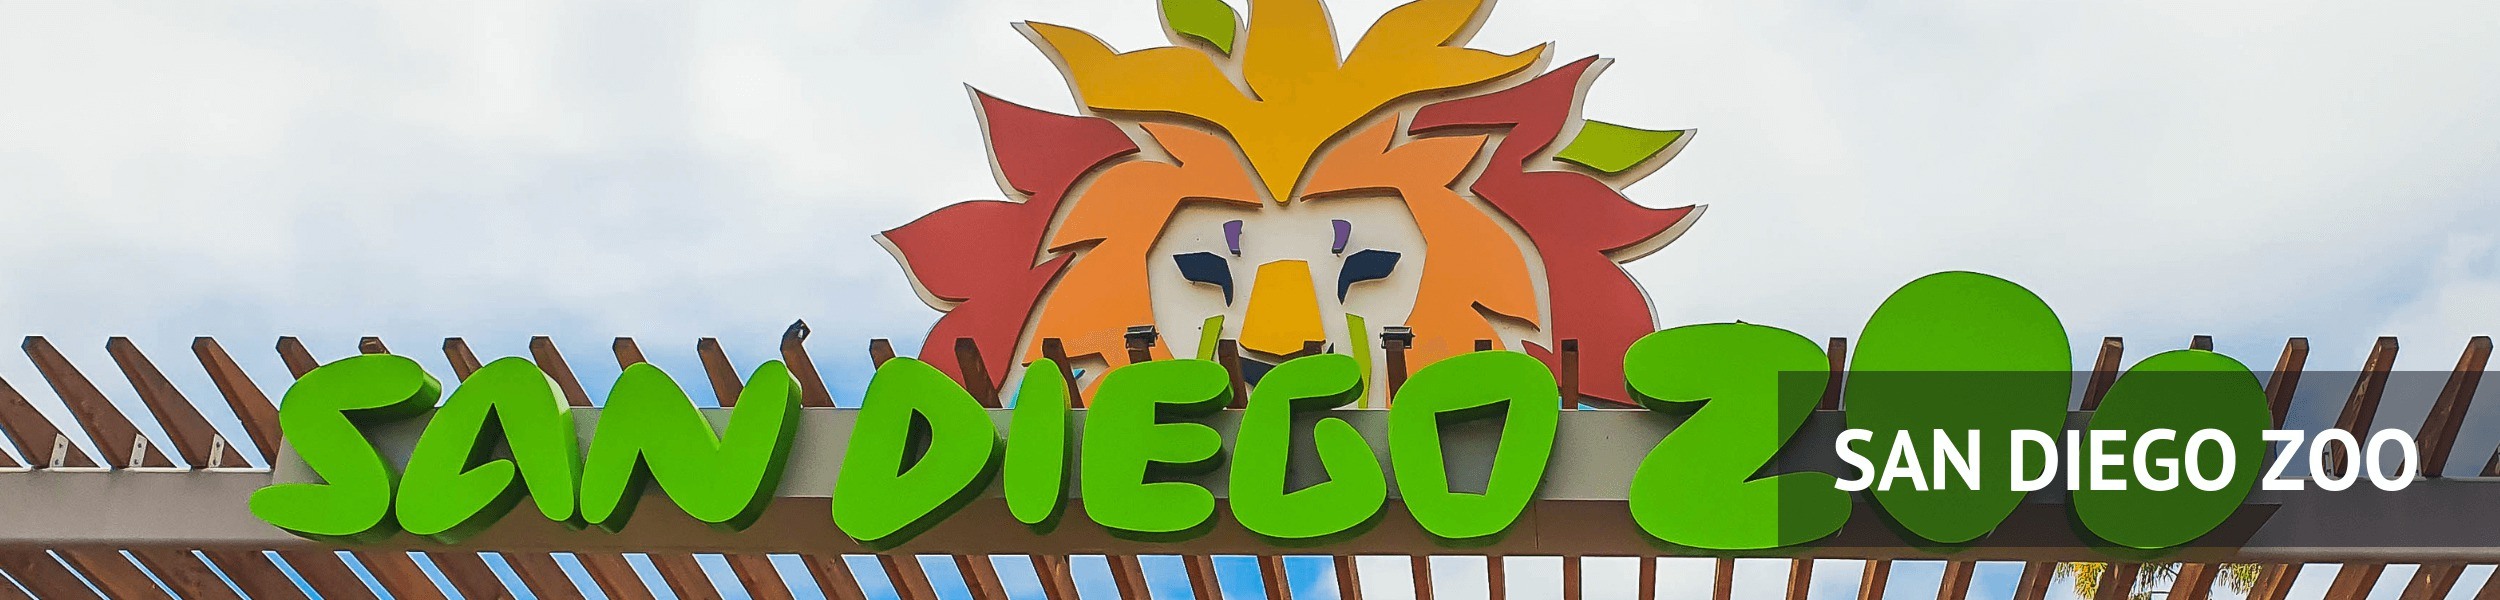 San Diego Zoo Review